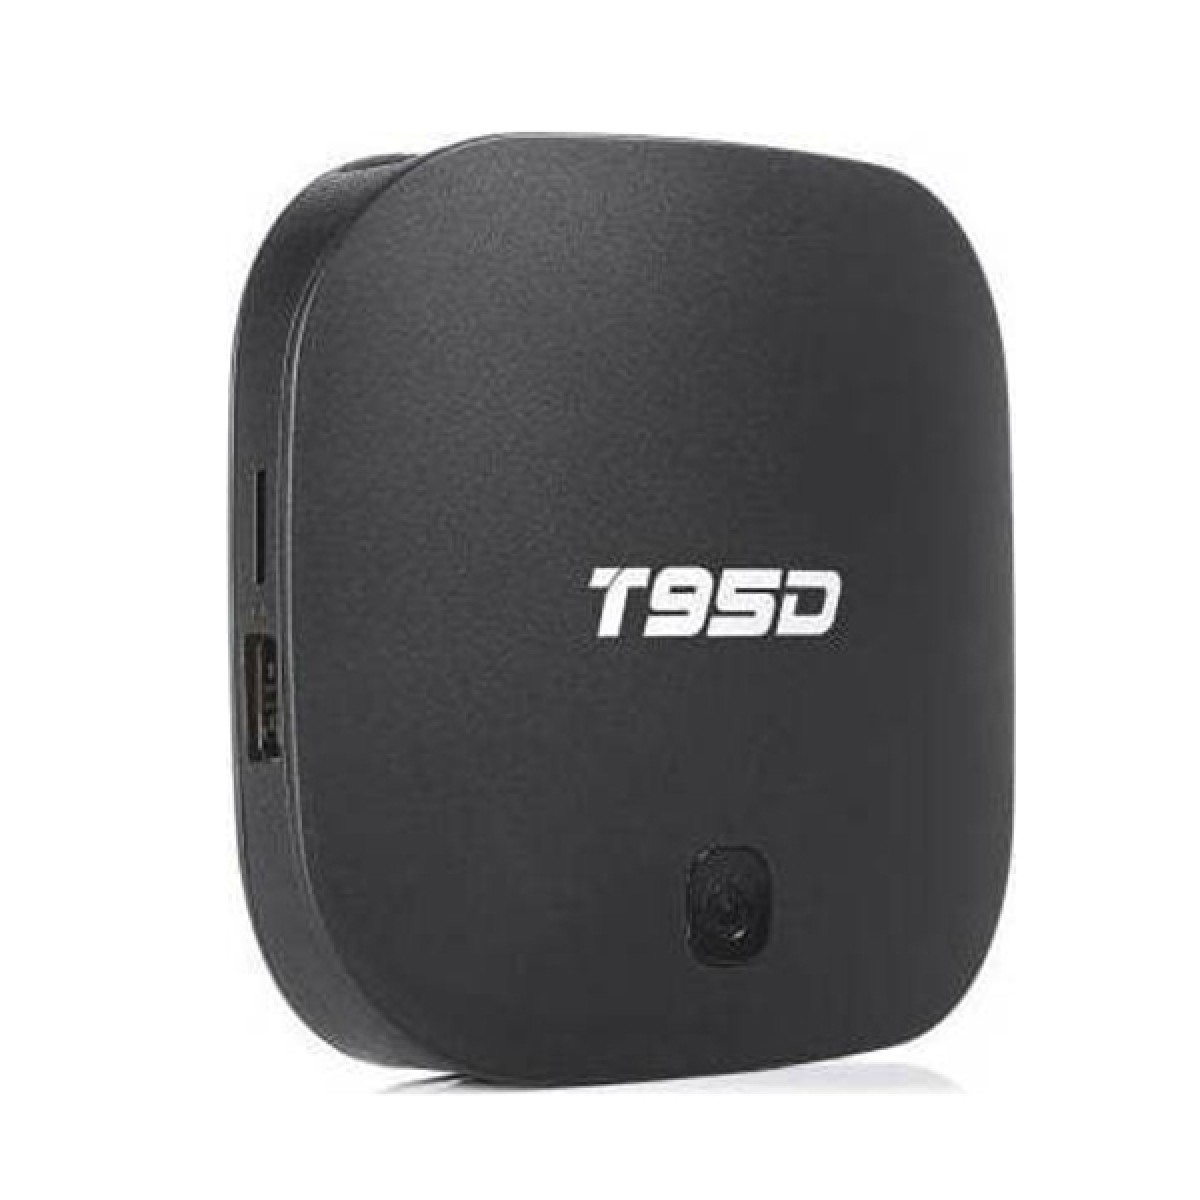 SUNVELL T95D Android 6.0 TV Box 1GB DDR3 6554